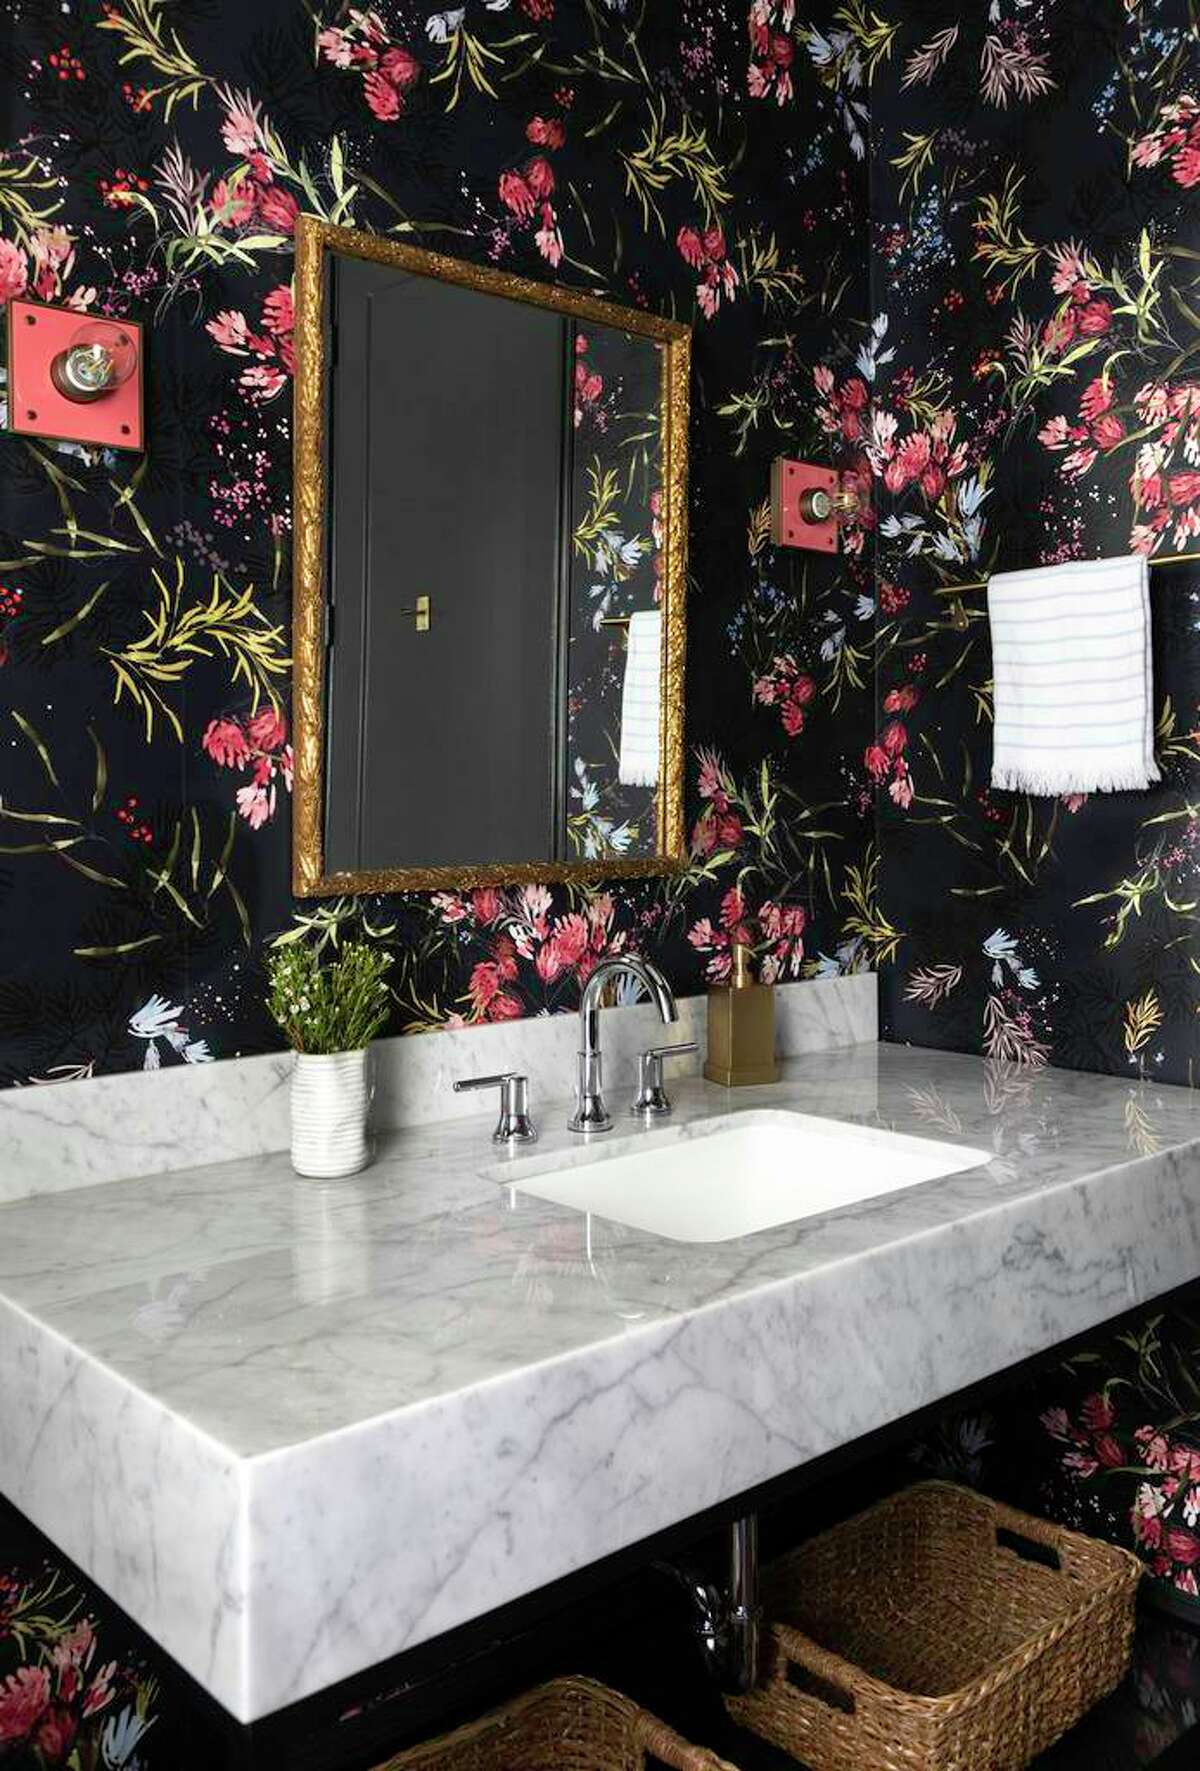 35 ideas to amp up your bathroom’s style